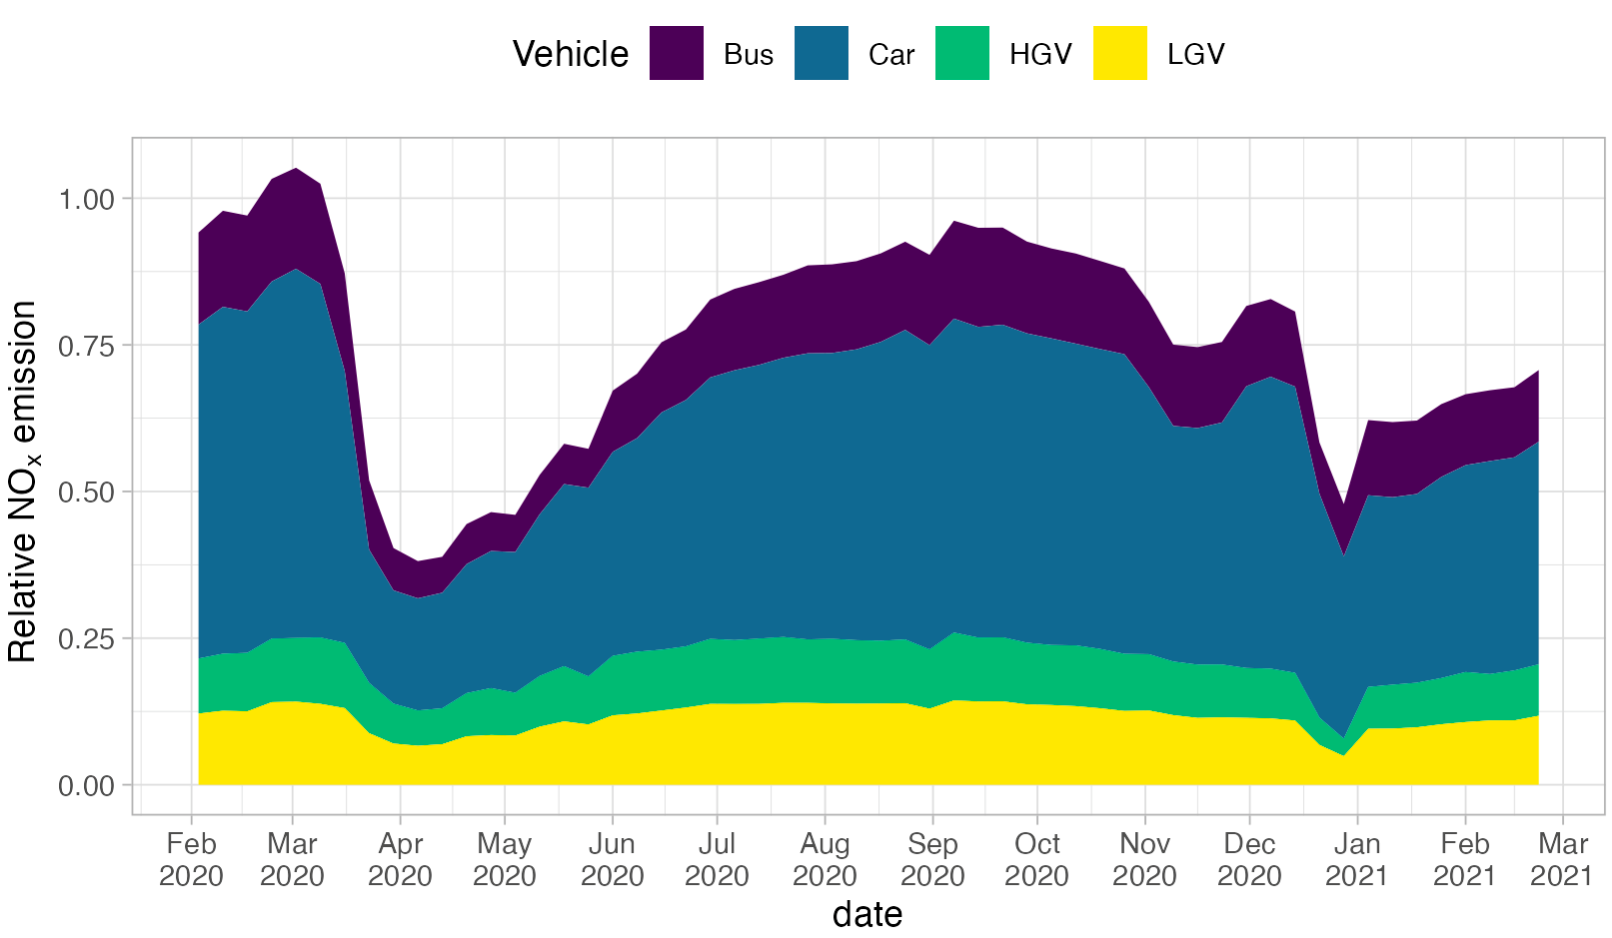 relative nox by vehicle type